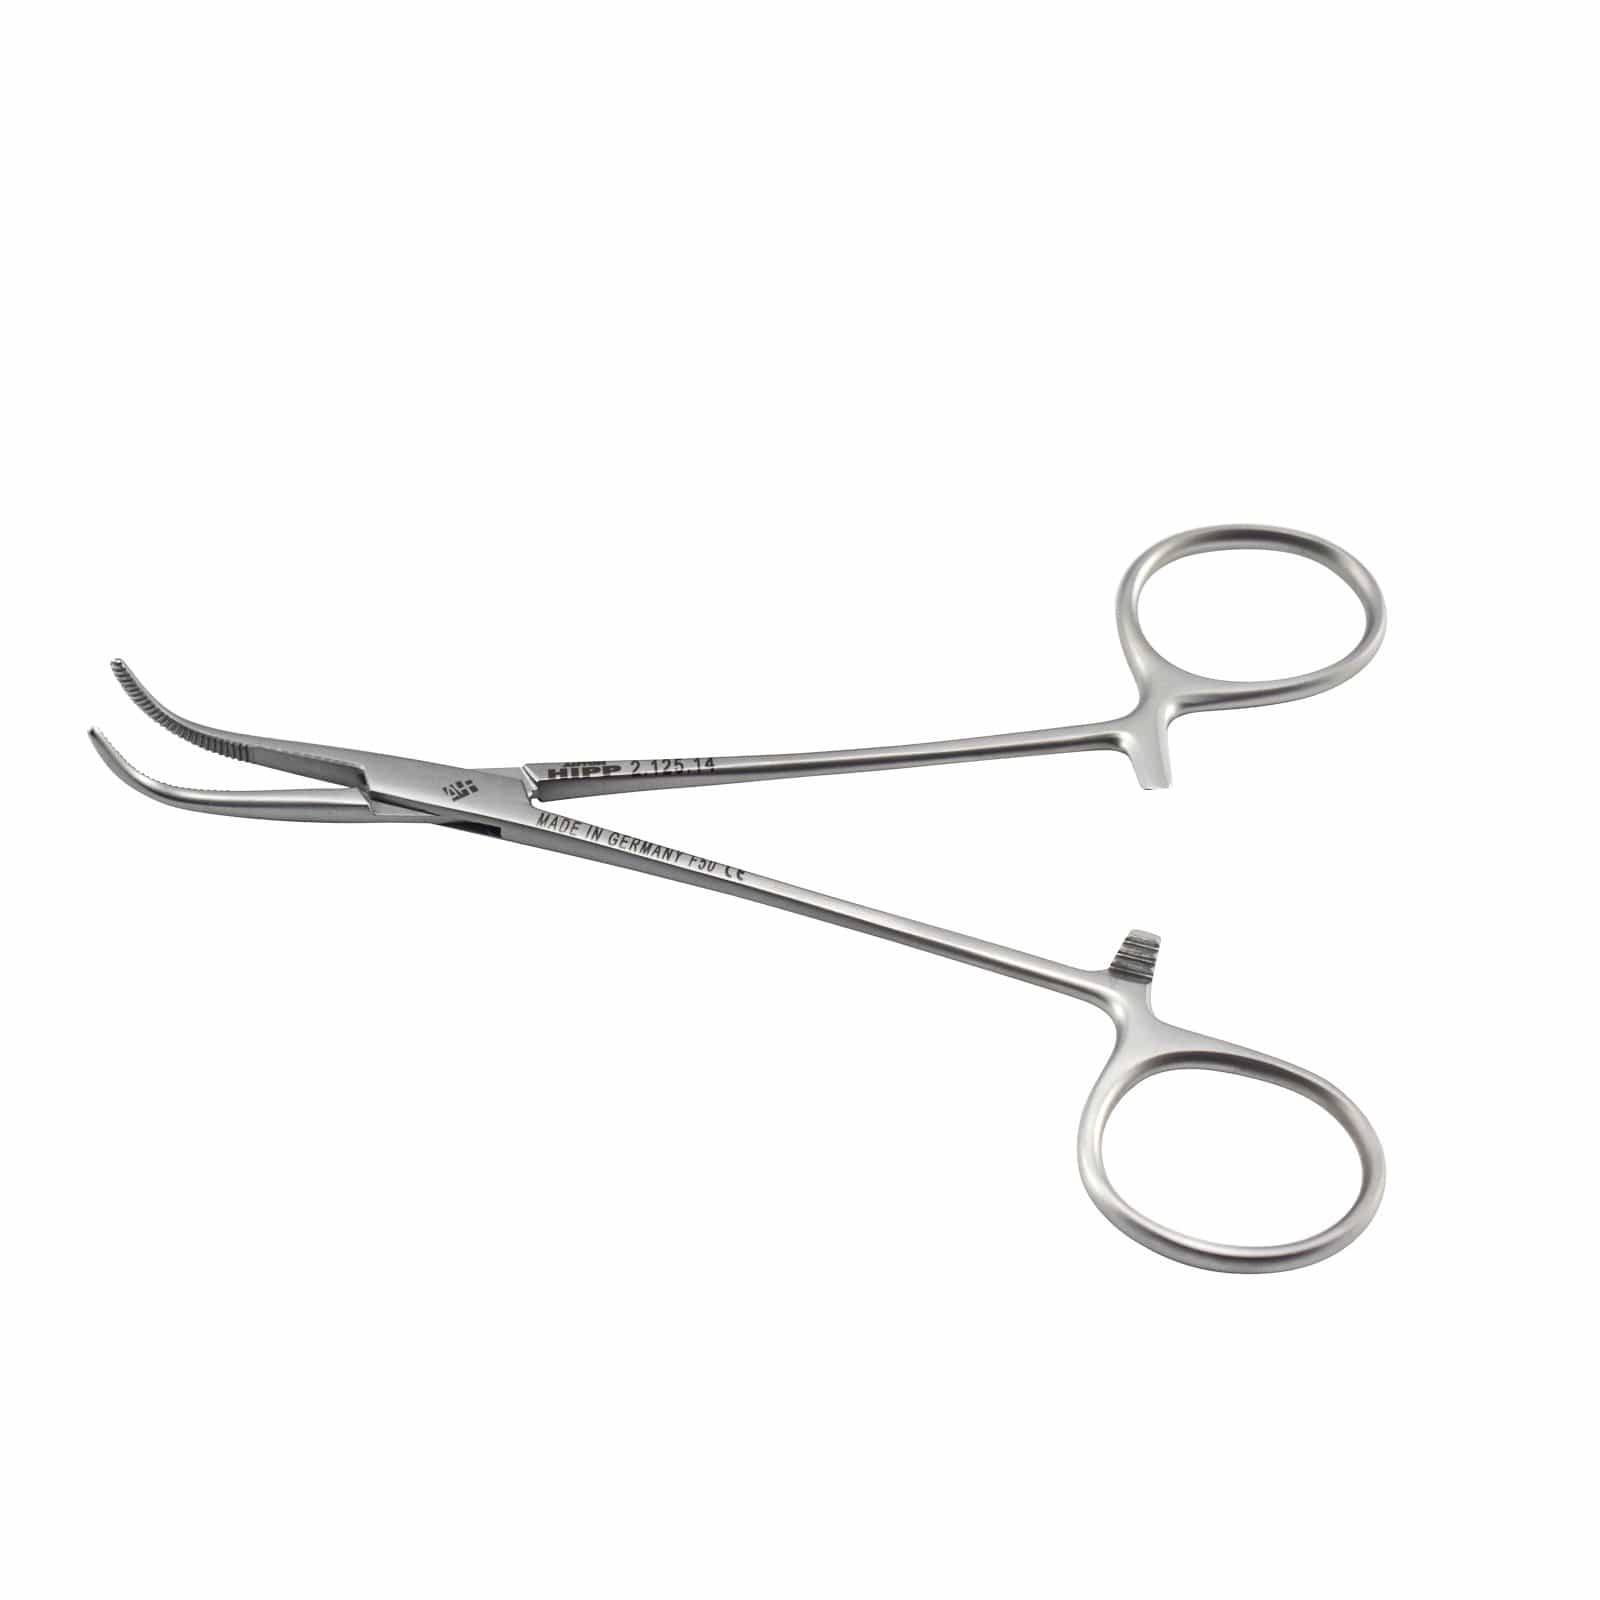 Hipp Surgical Instruments 14cm / Straight / Baby Hipp Mixter Artery Forceps